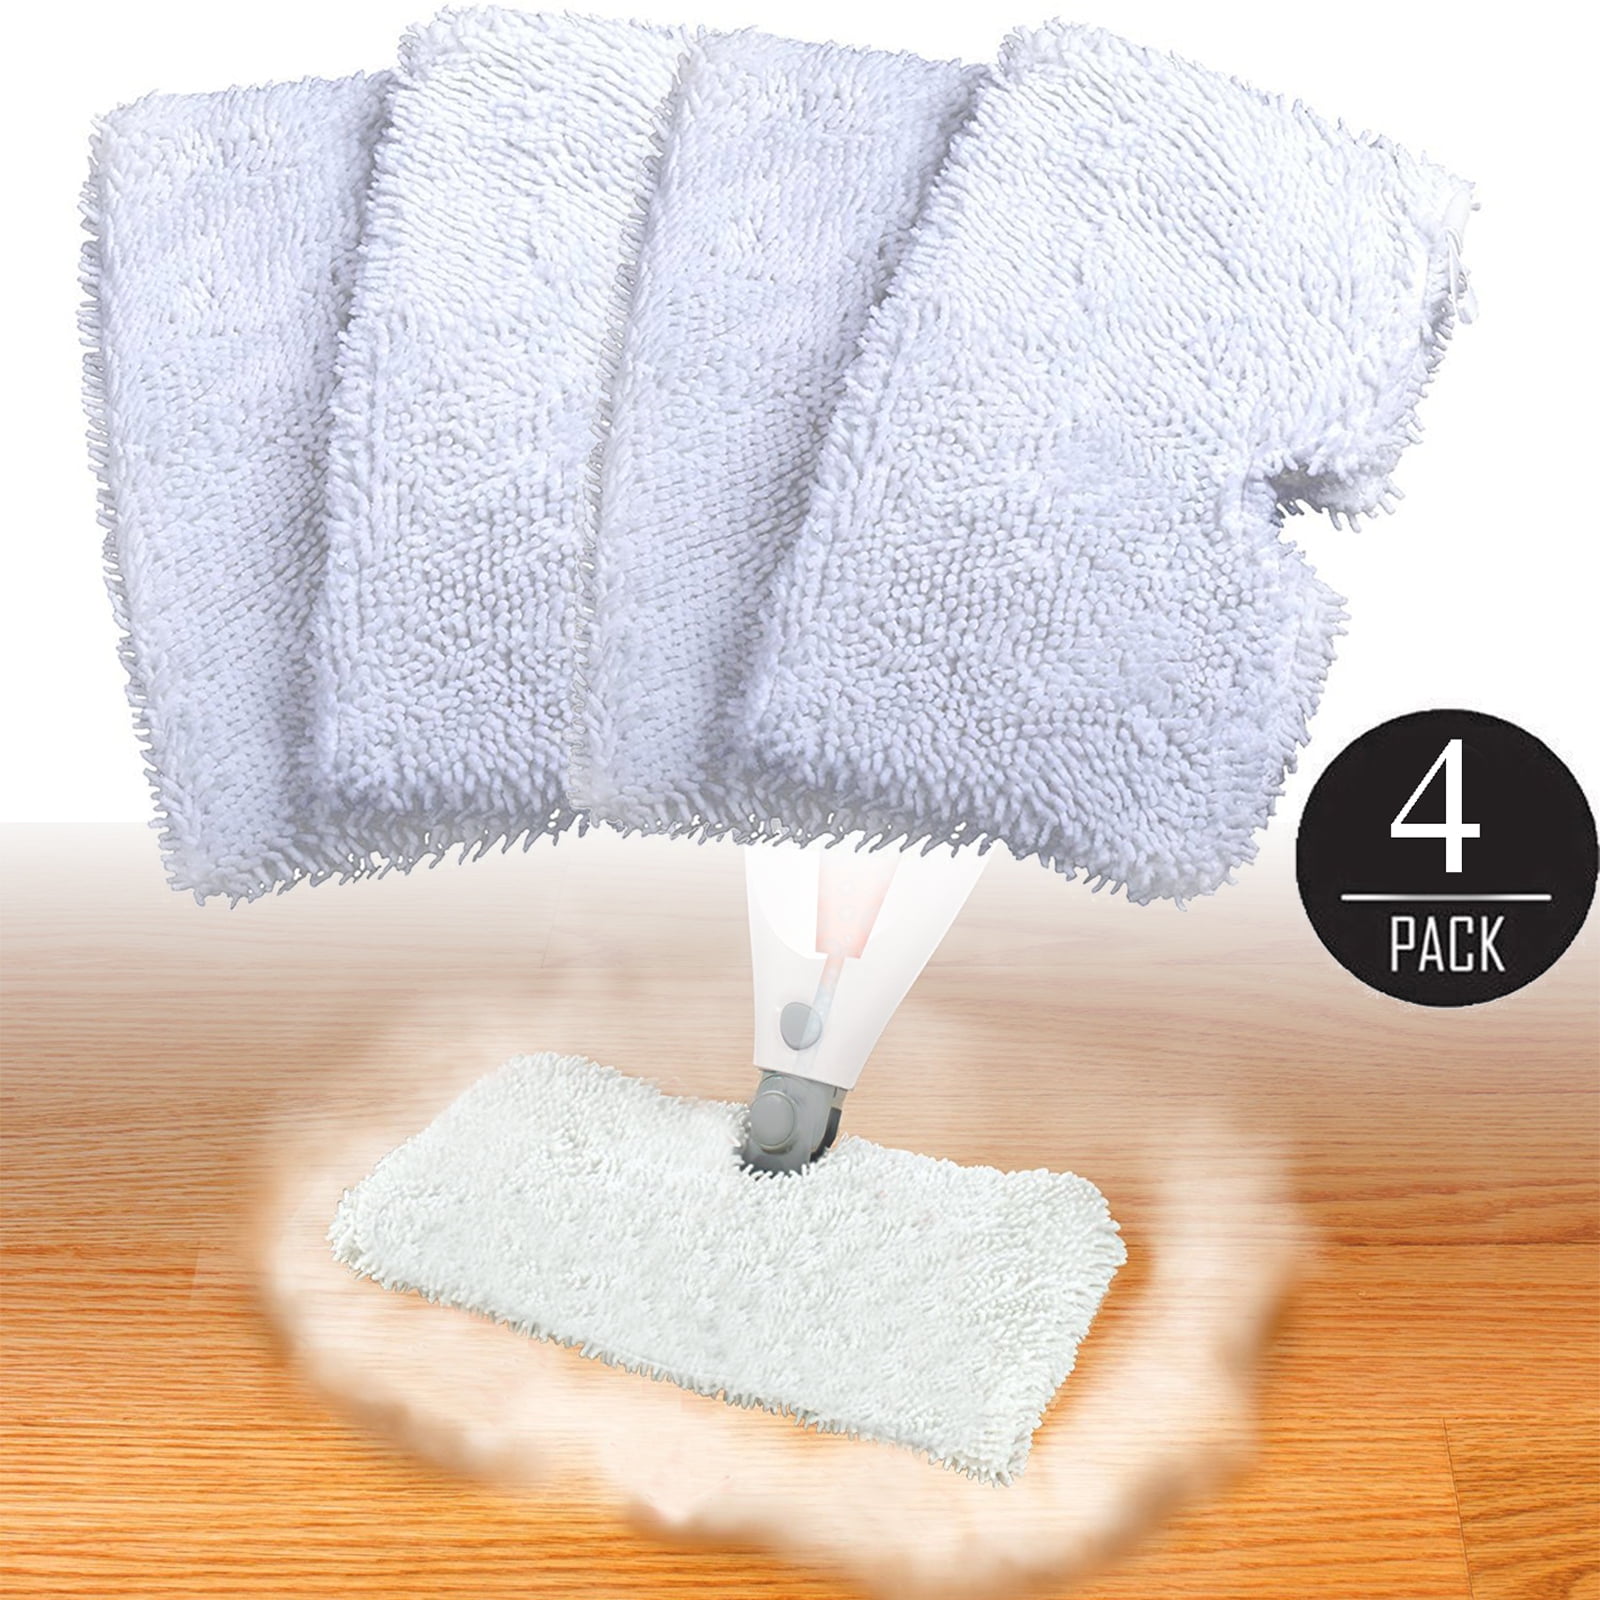 To fit CORAL SHARK MICRO FIBRE STEAM MOP CLEANING PADS  2 Pack 